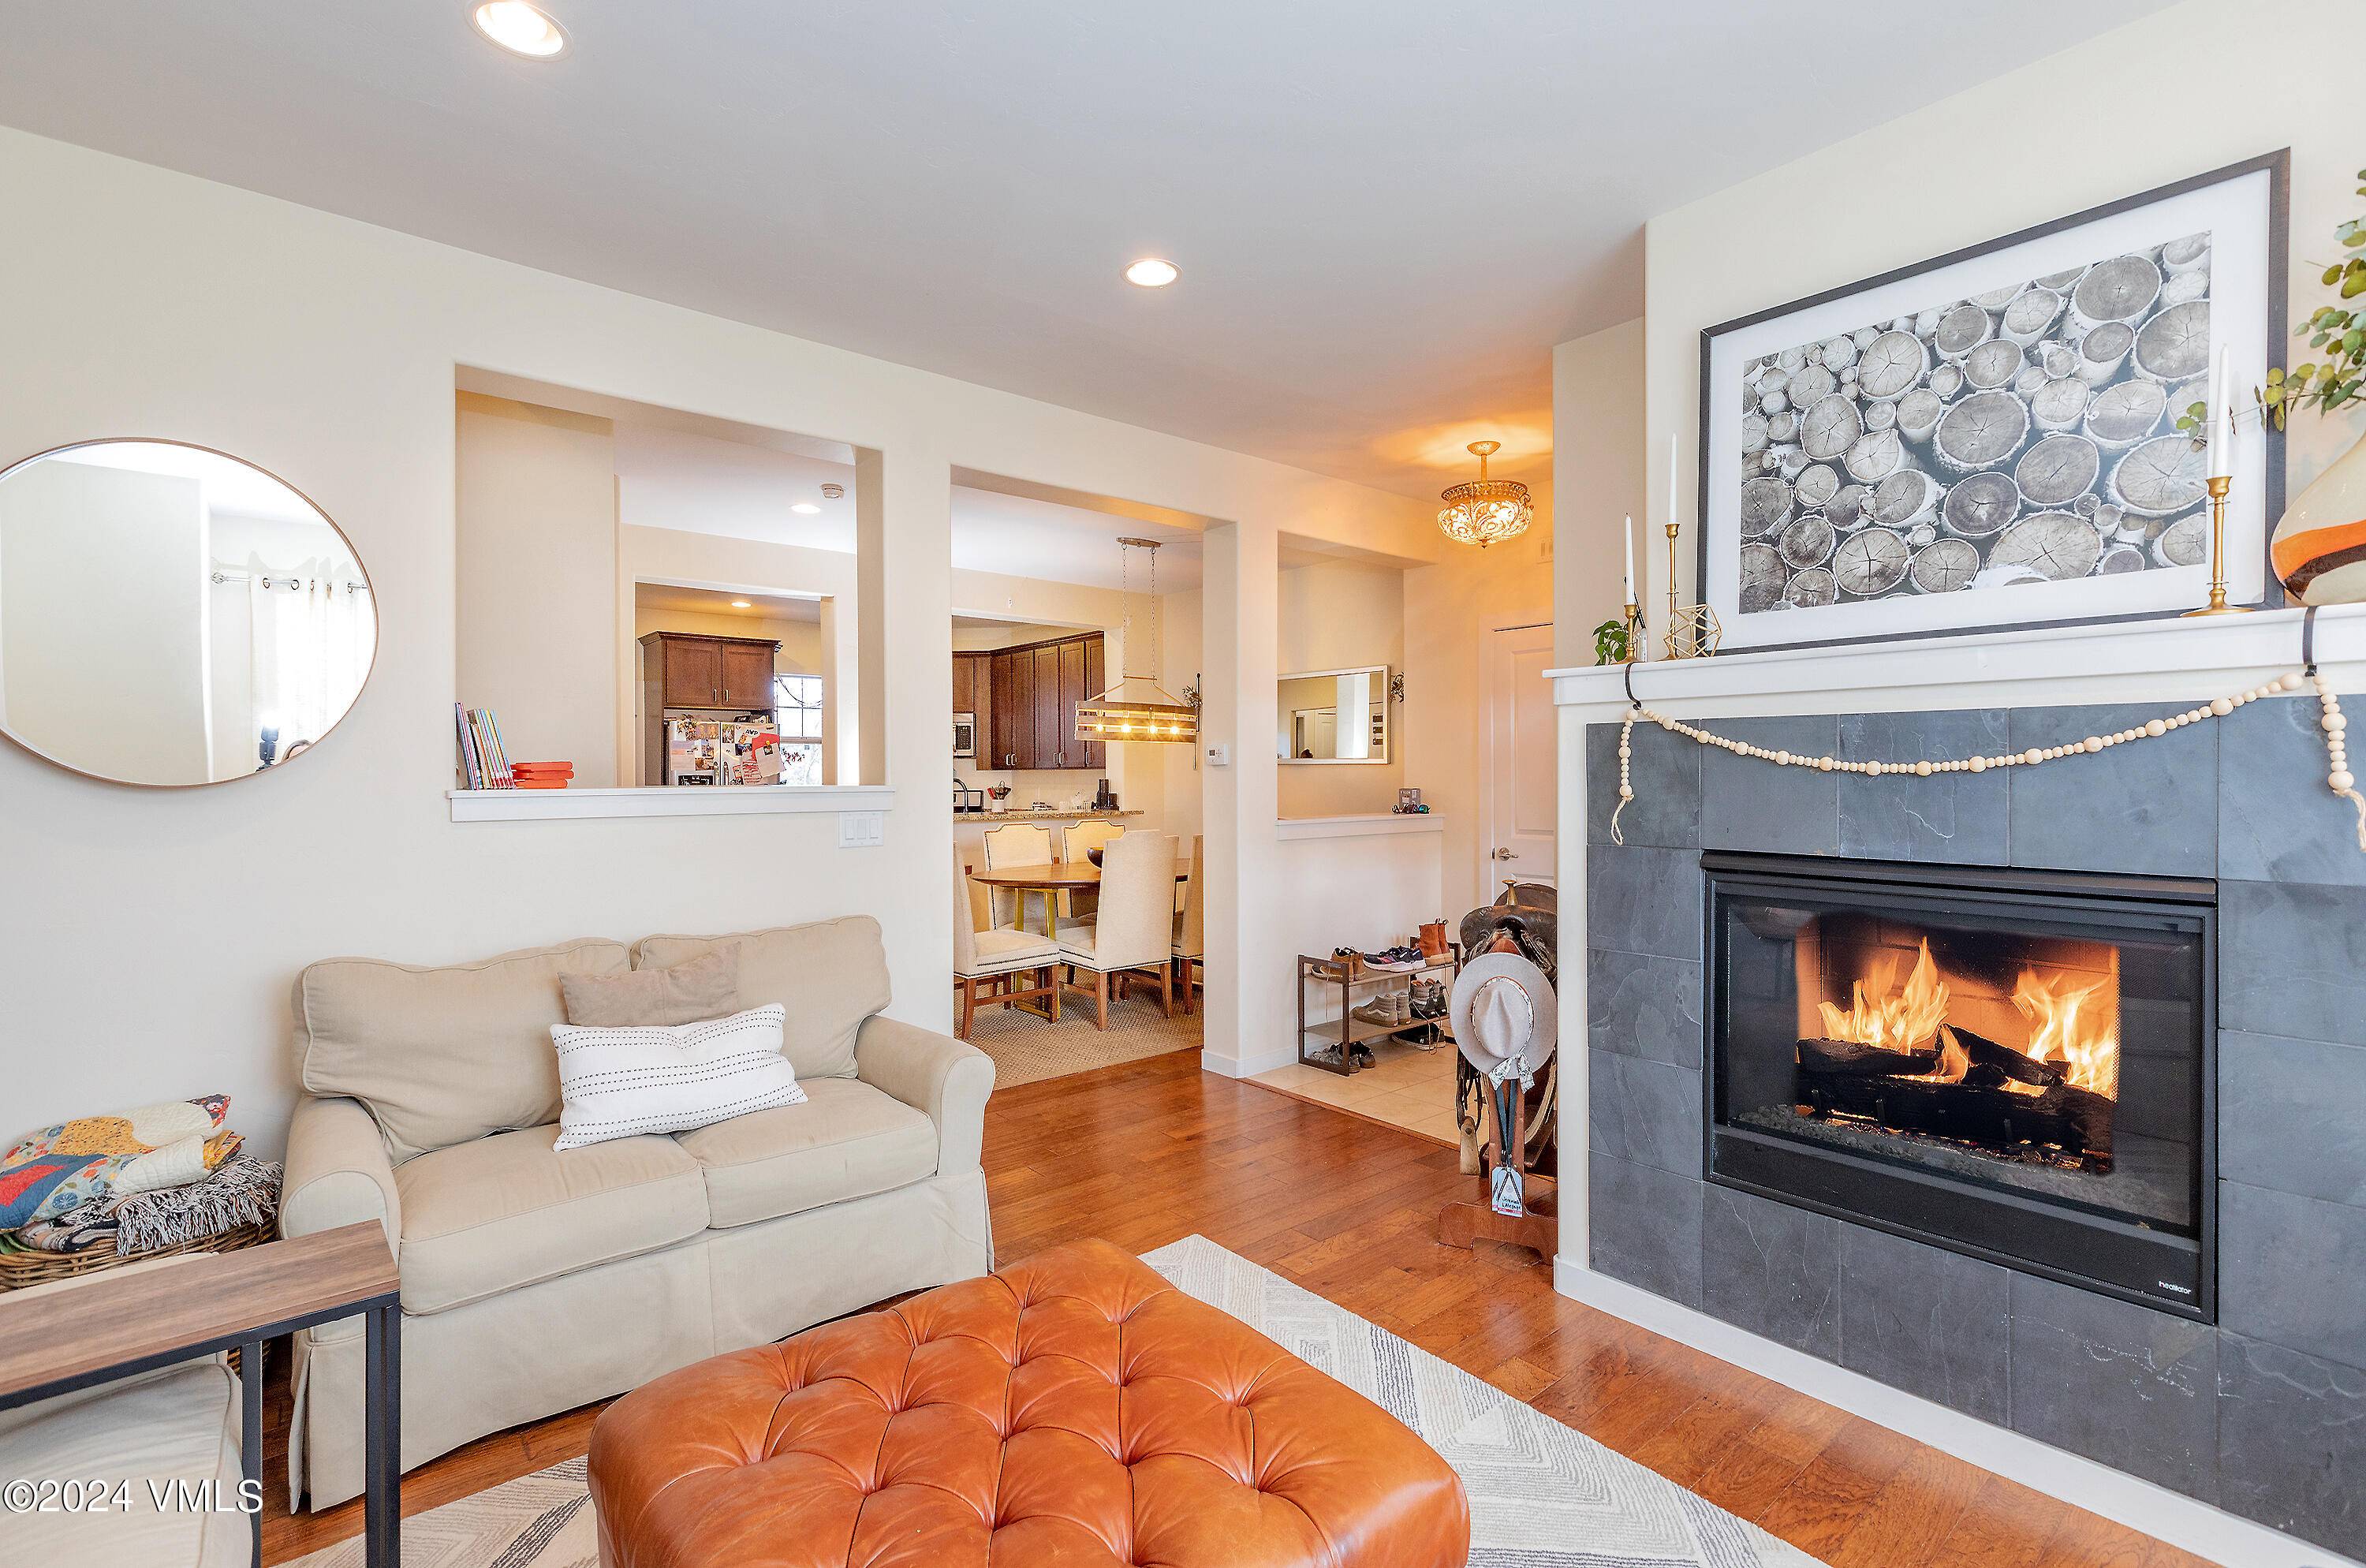 Mountain living awaits in this 4 bedroom townhome nestled in the heart of Eagle.